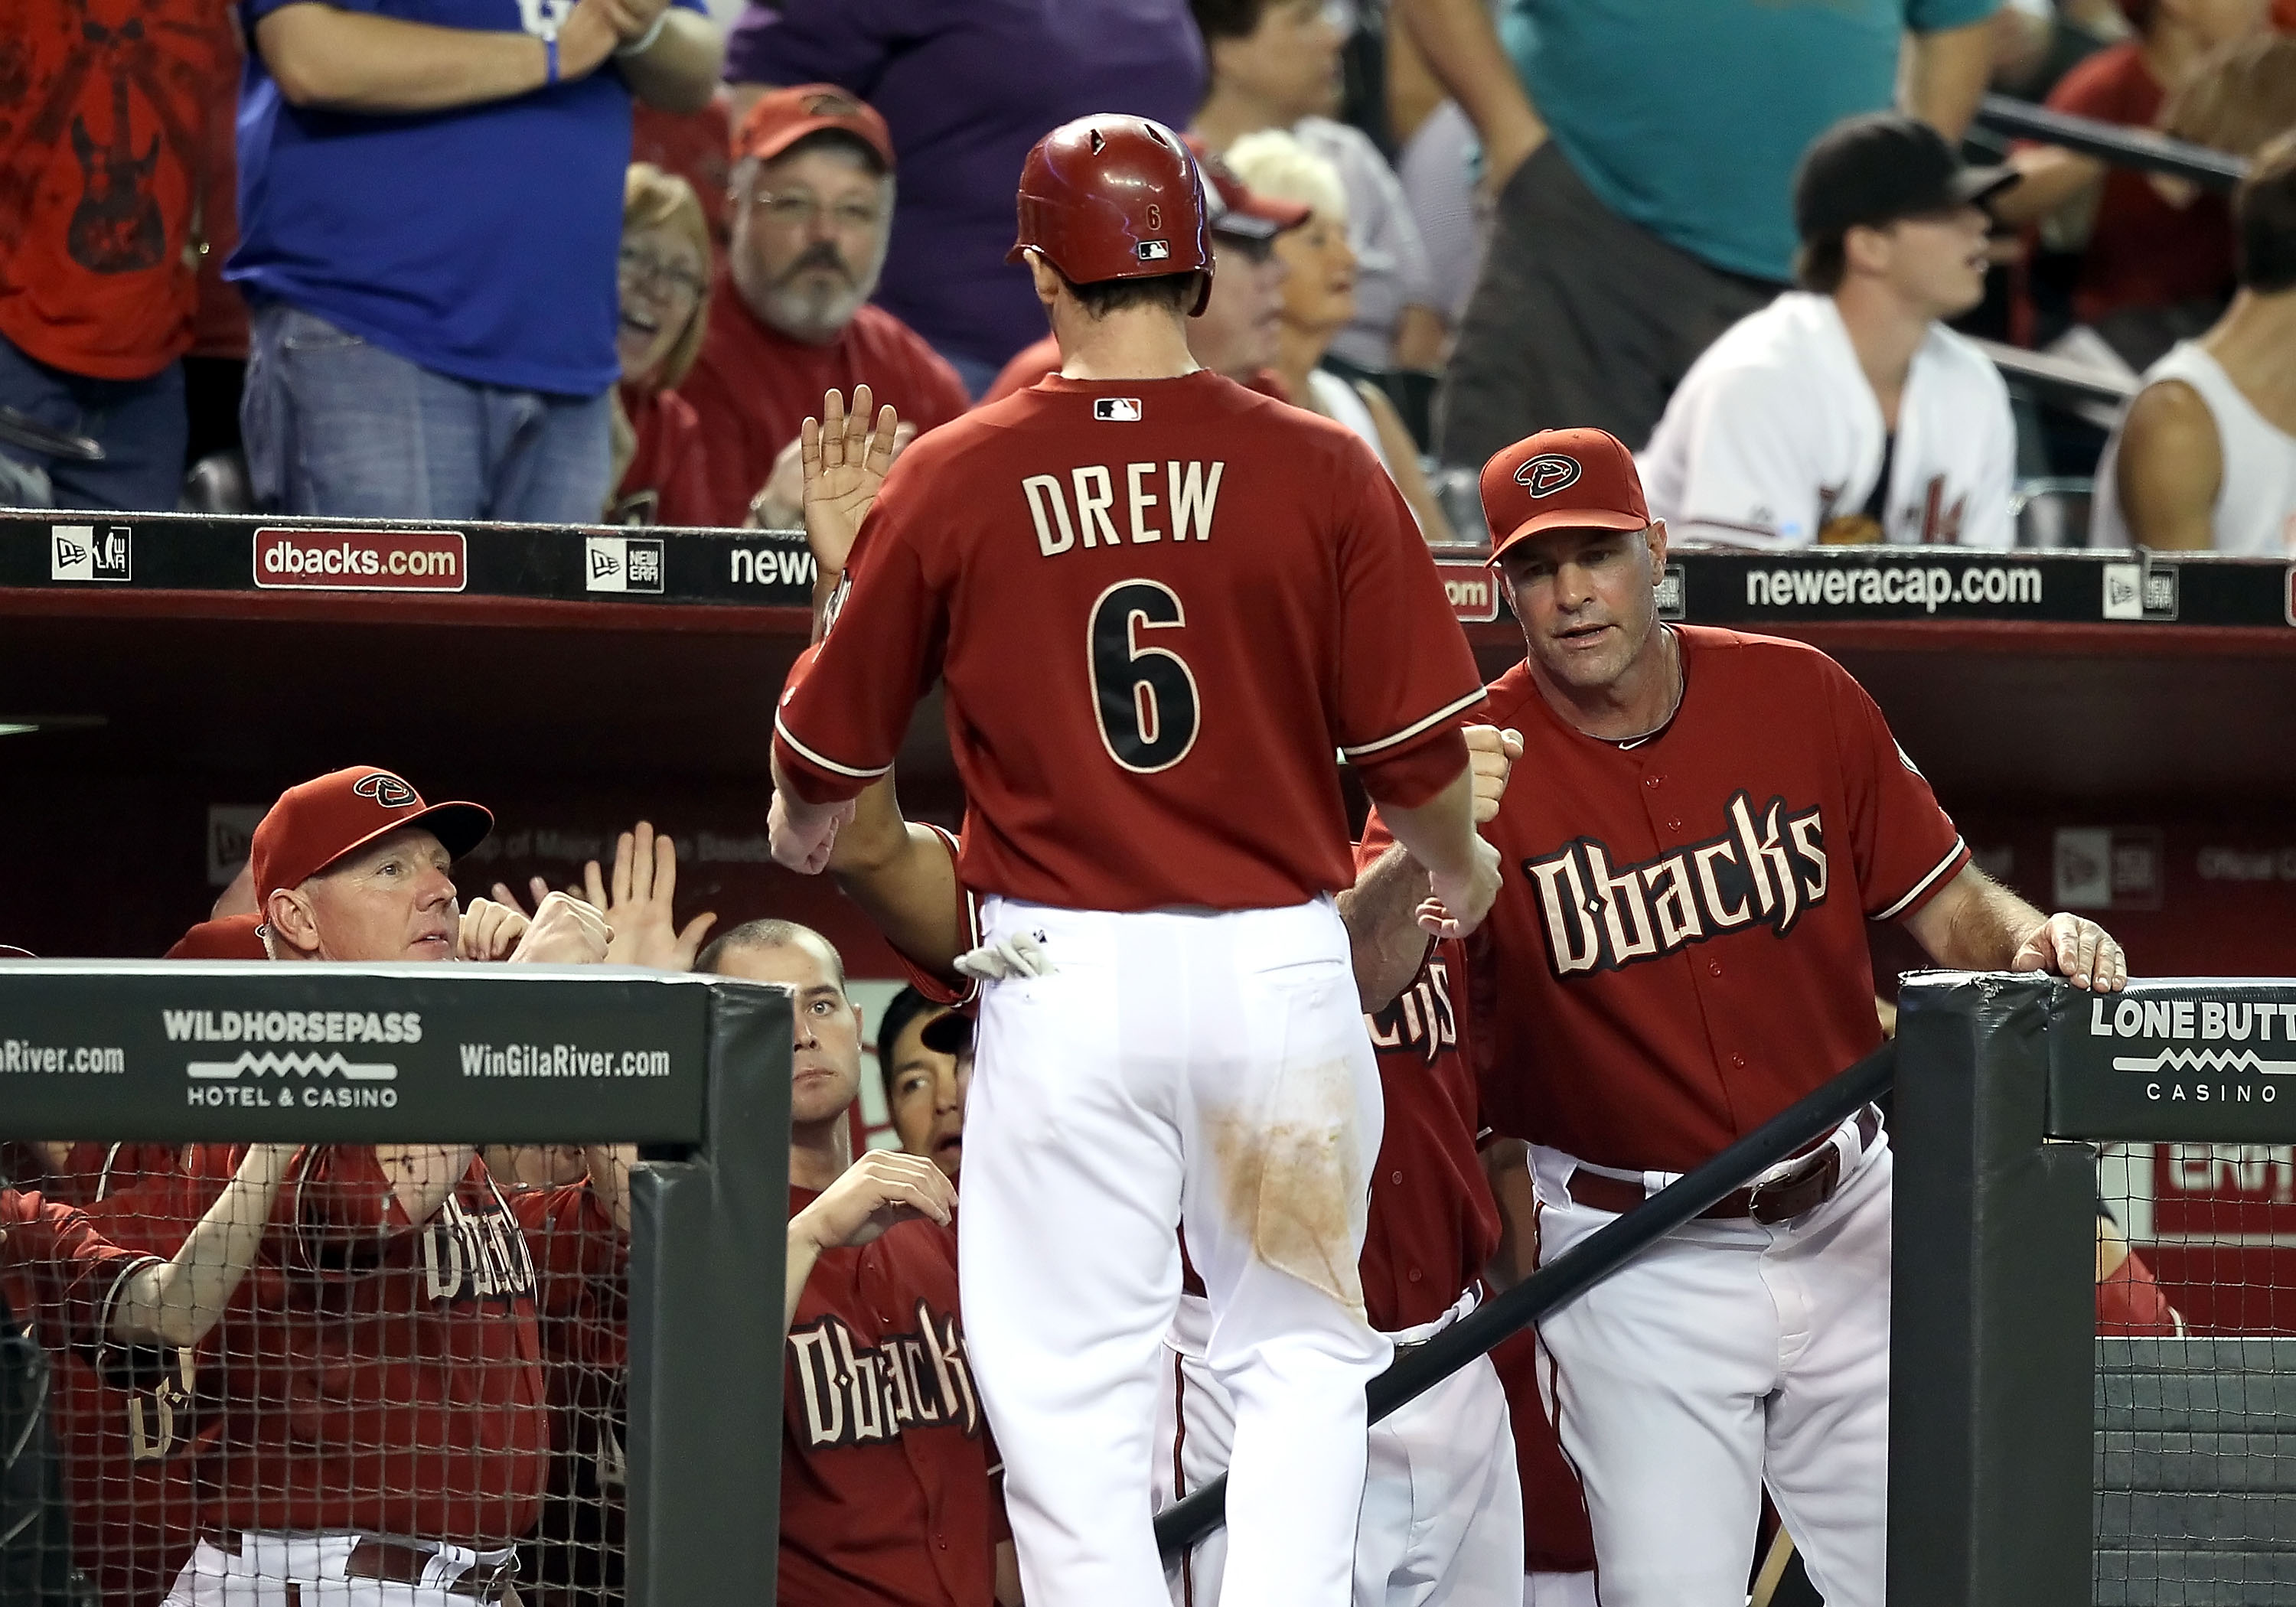 PHOENIX - AUGUST 18:  Manager Kirk Gibson of the Arizona Diamondbacks greets Stephen Drew #6 after he scored against the Cincinnati Reds during the Major League Baseball game at Chase Field on August 18, 2010 in Phoenix, Arizona. The Reds defeated the Dia